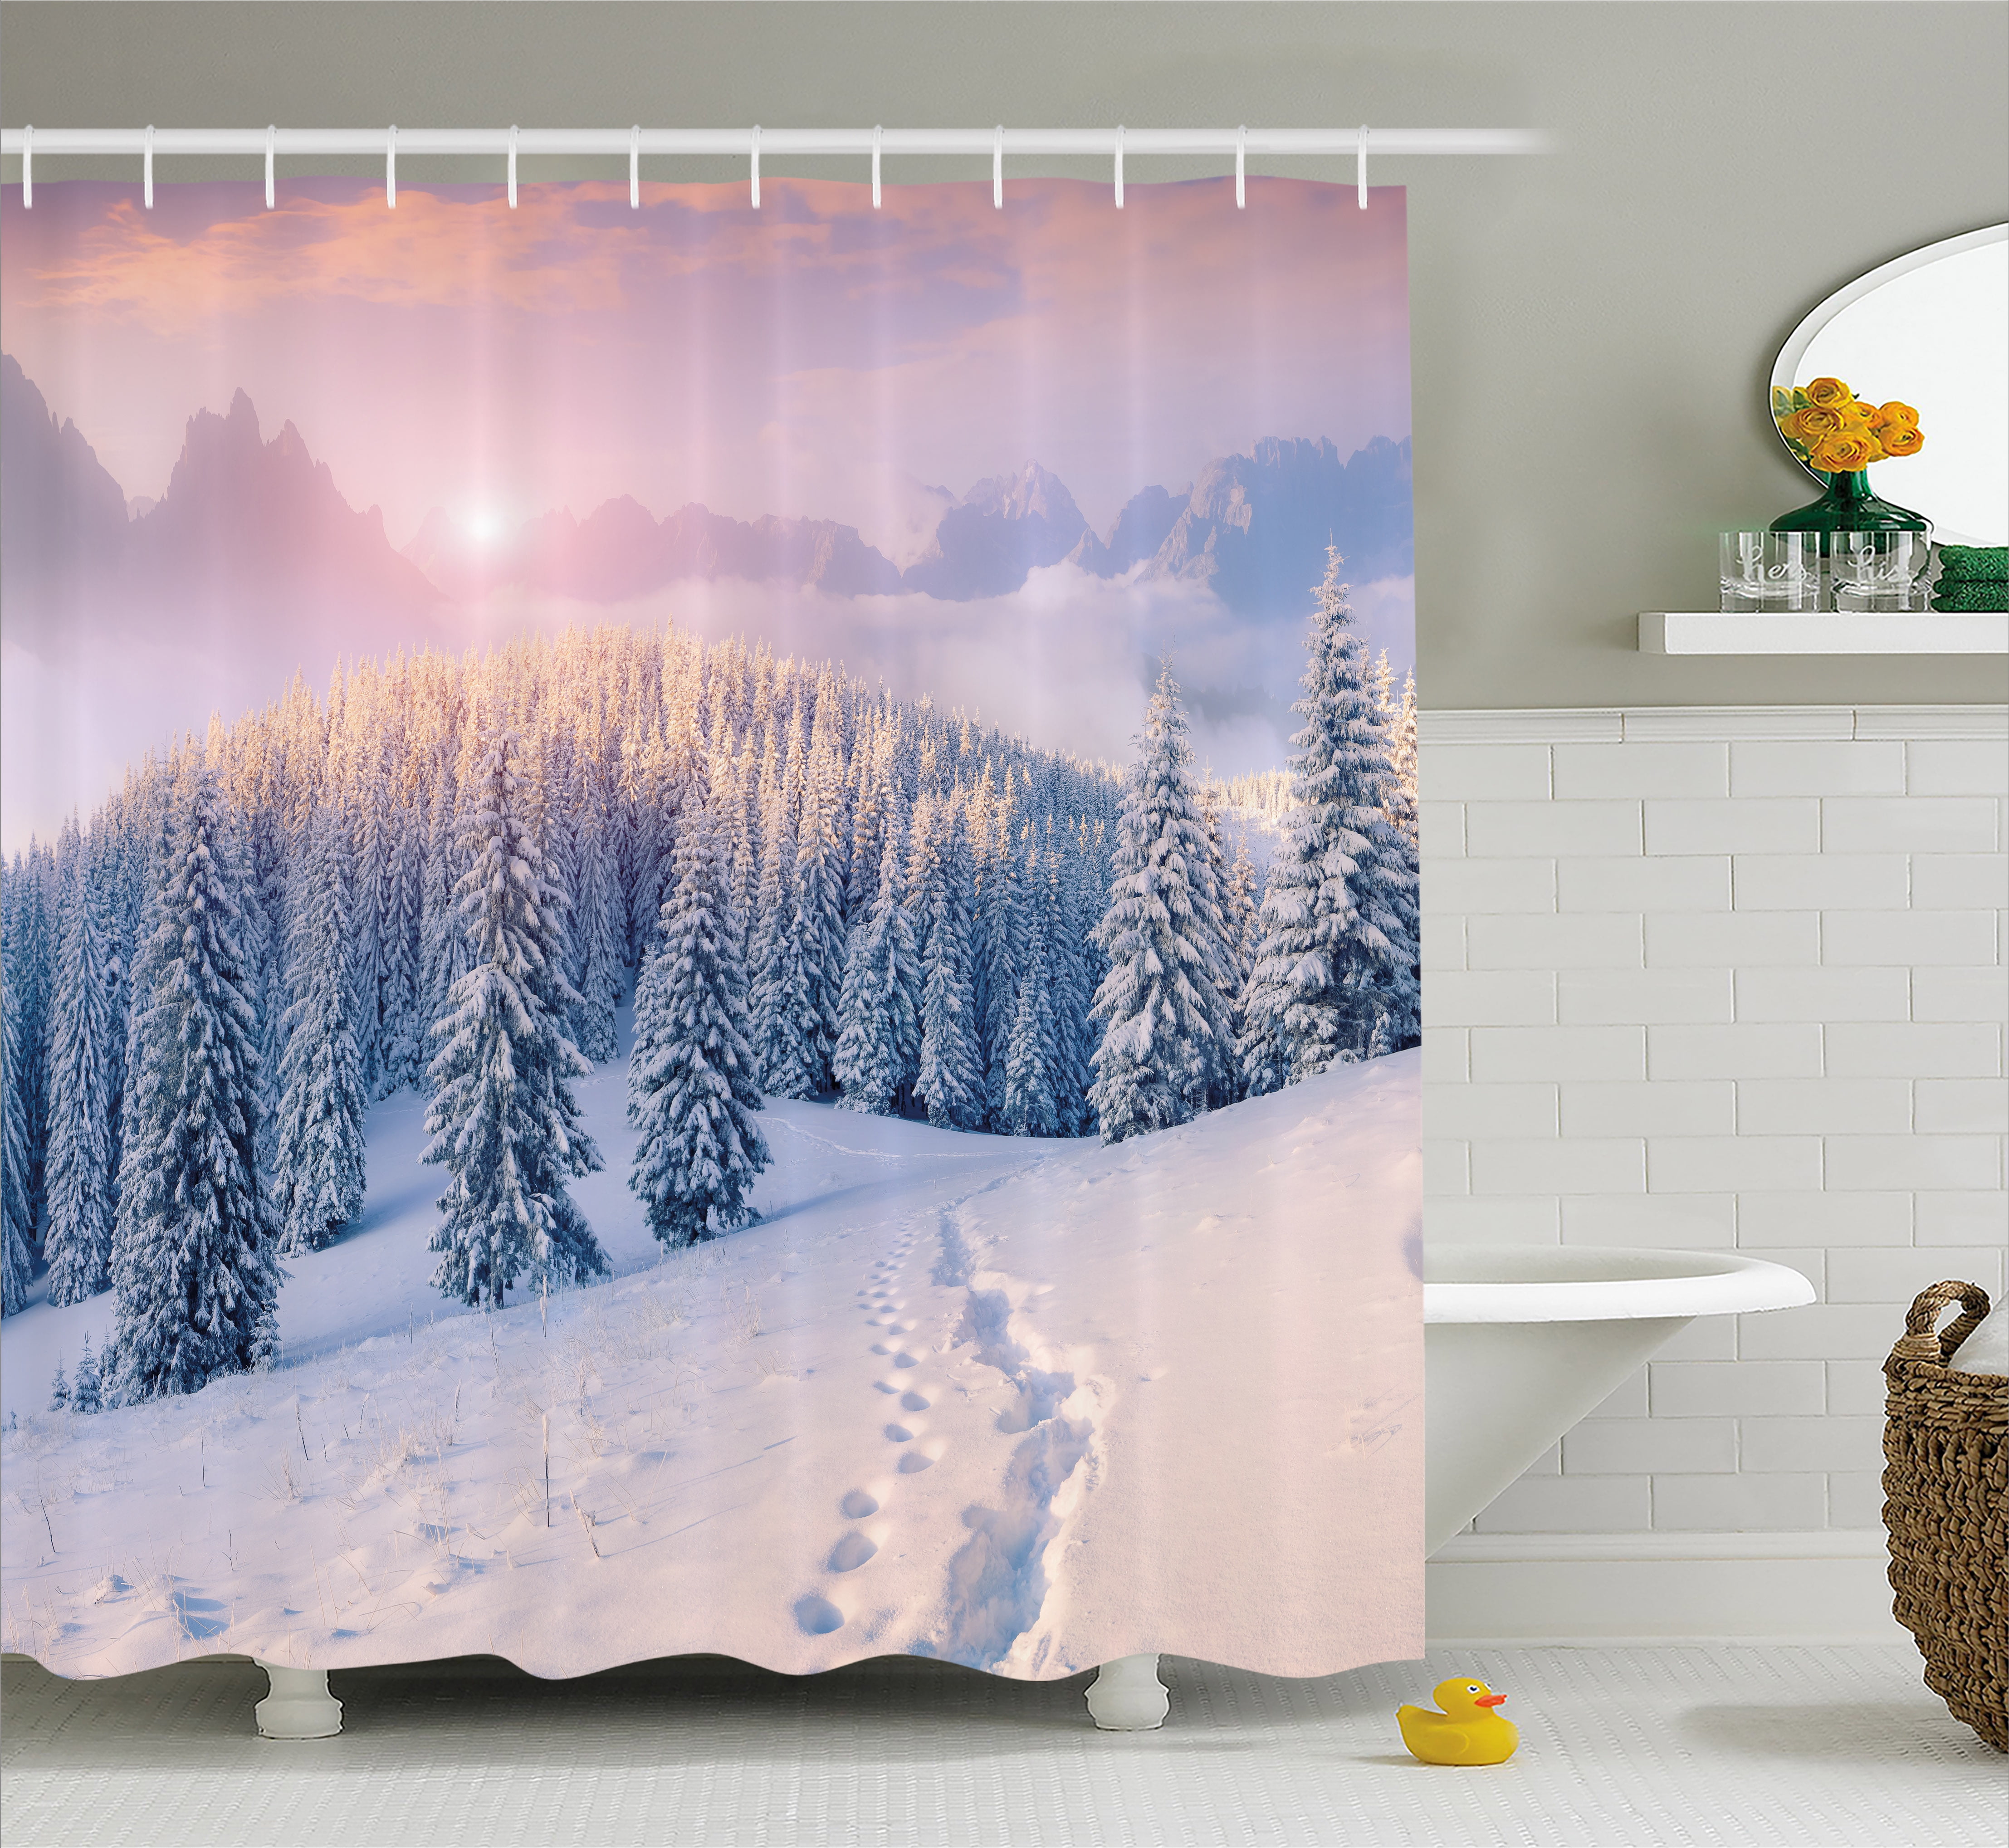 Details about   Autumn Shower Curtain Morning in Mountain Tree Print for Bathroom 